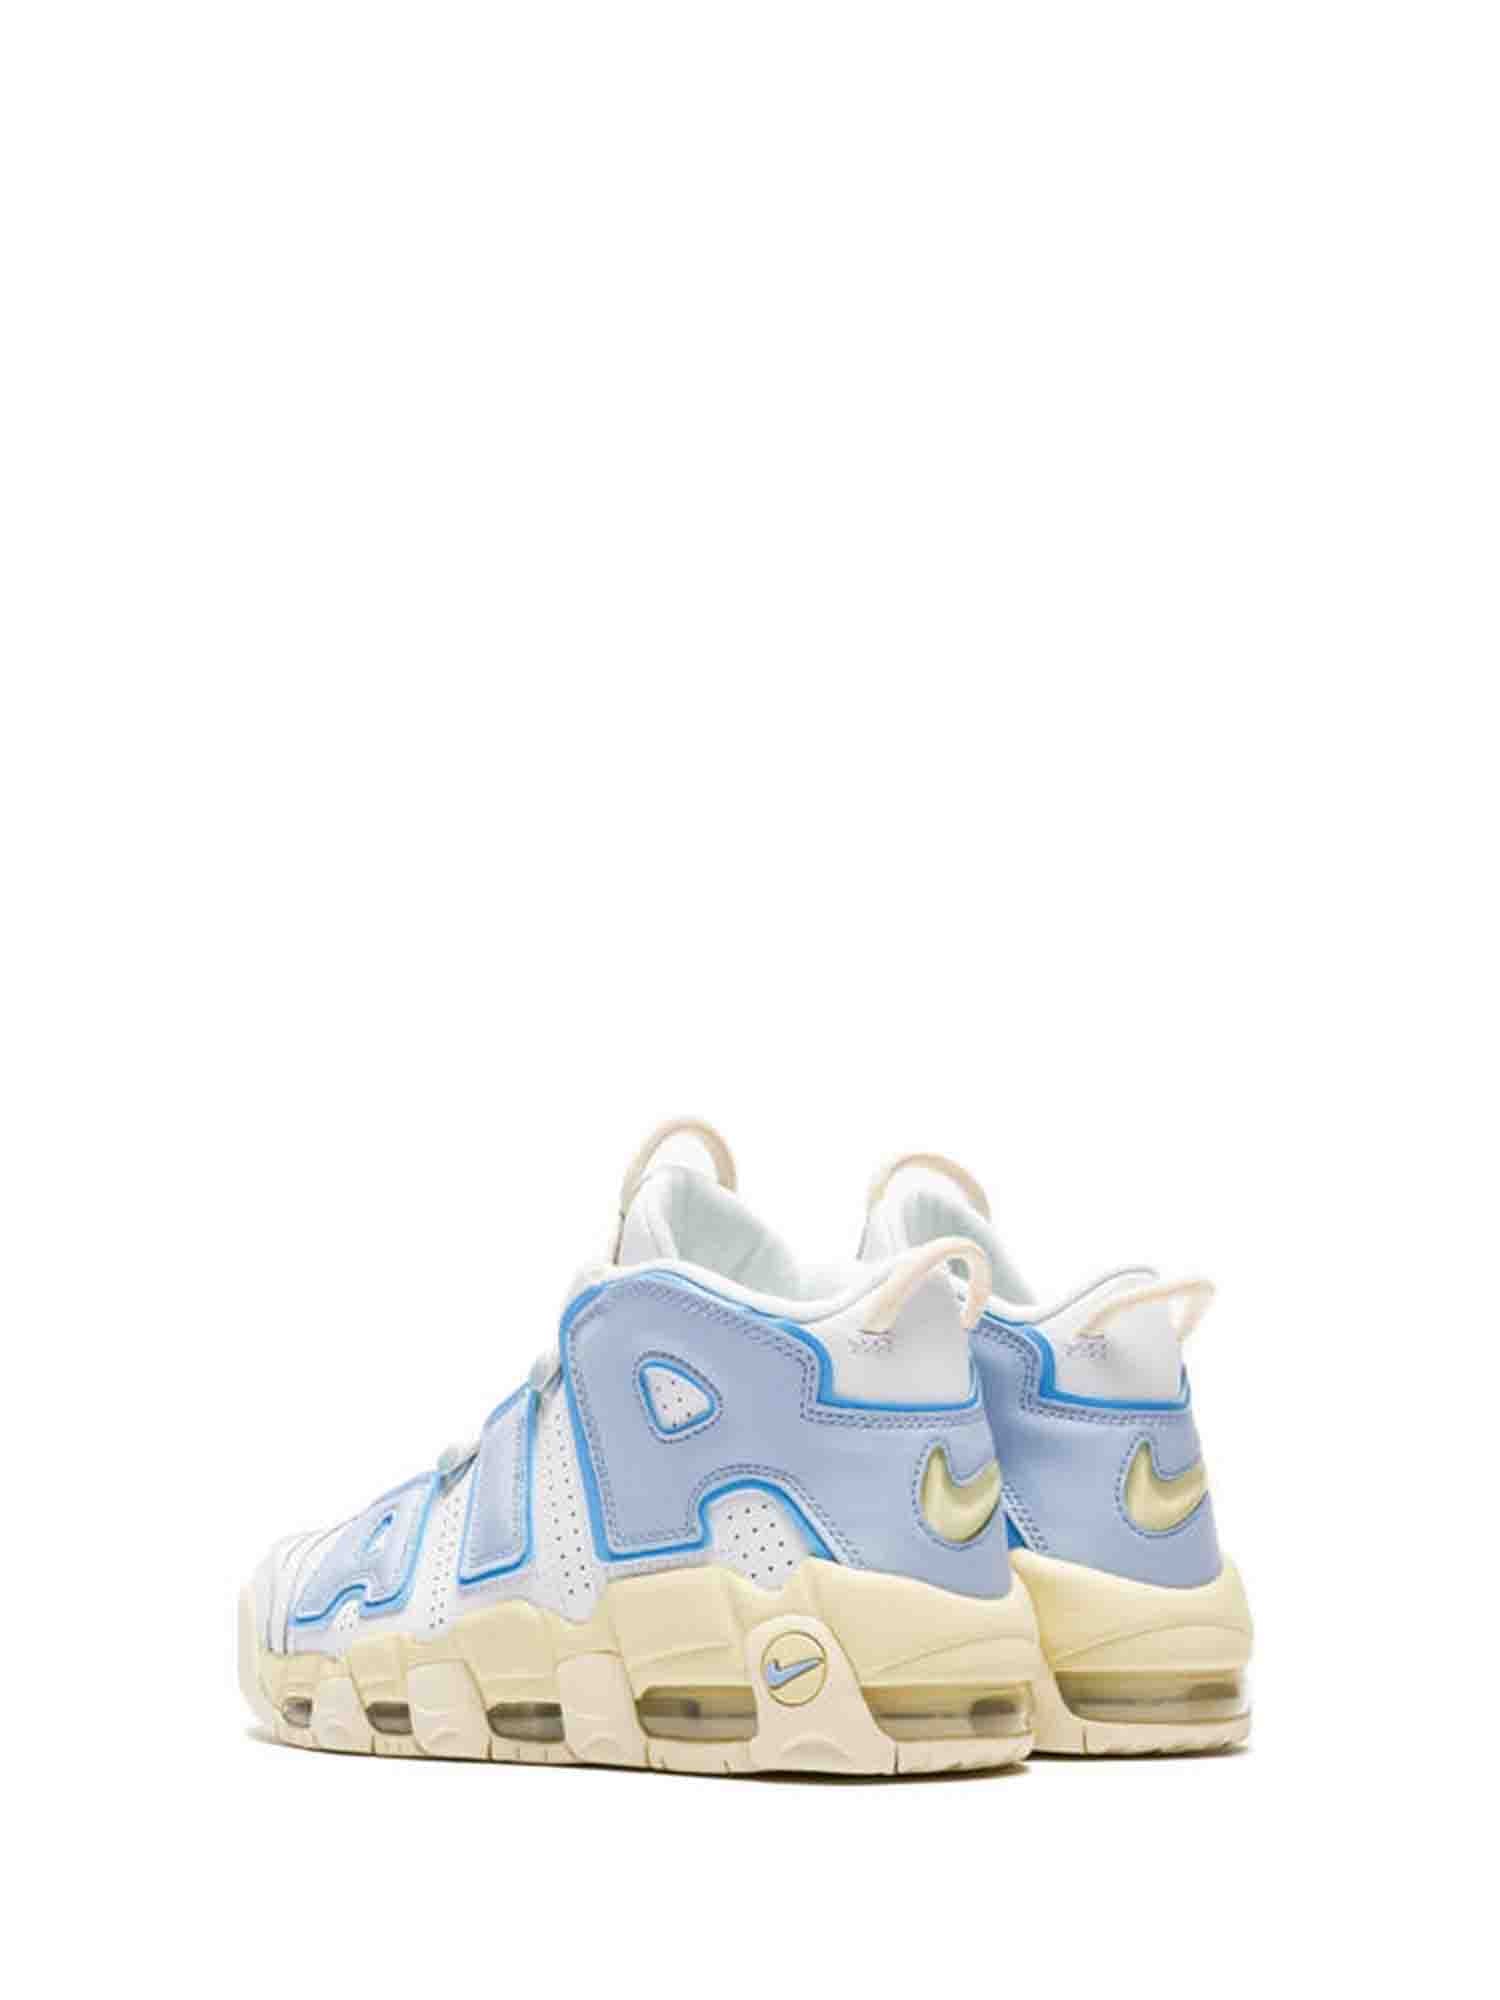 NIKE AIR MORE UPTEMPO SNEAKERS DONNA BIANCO-CELESTE